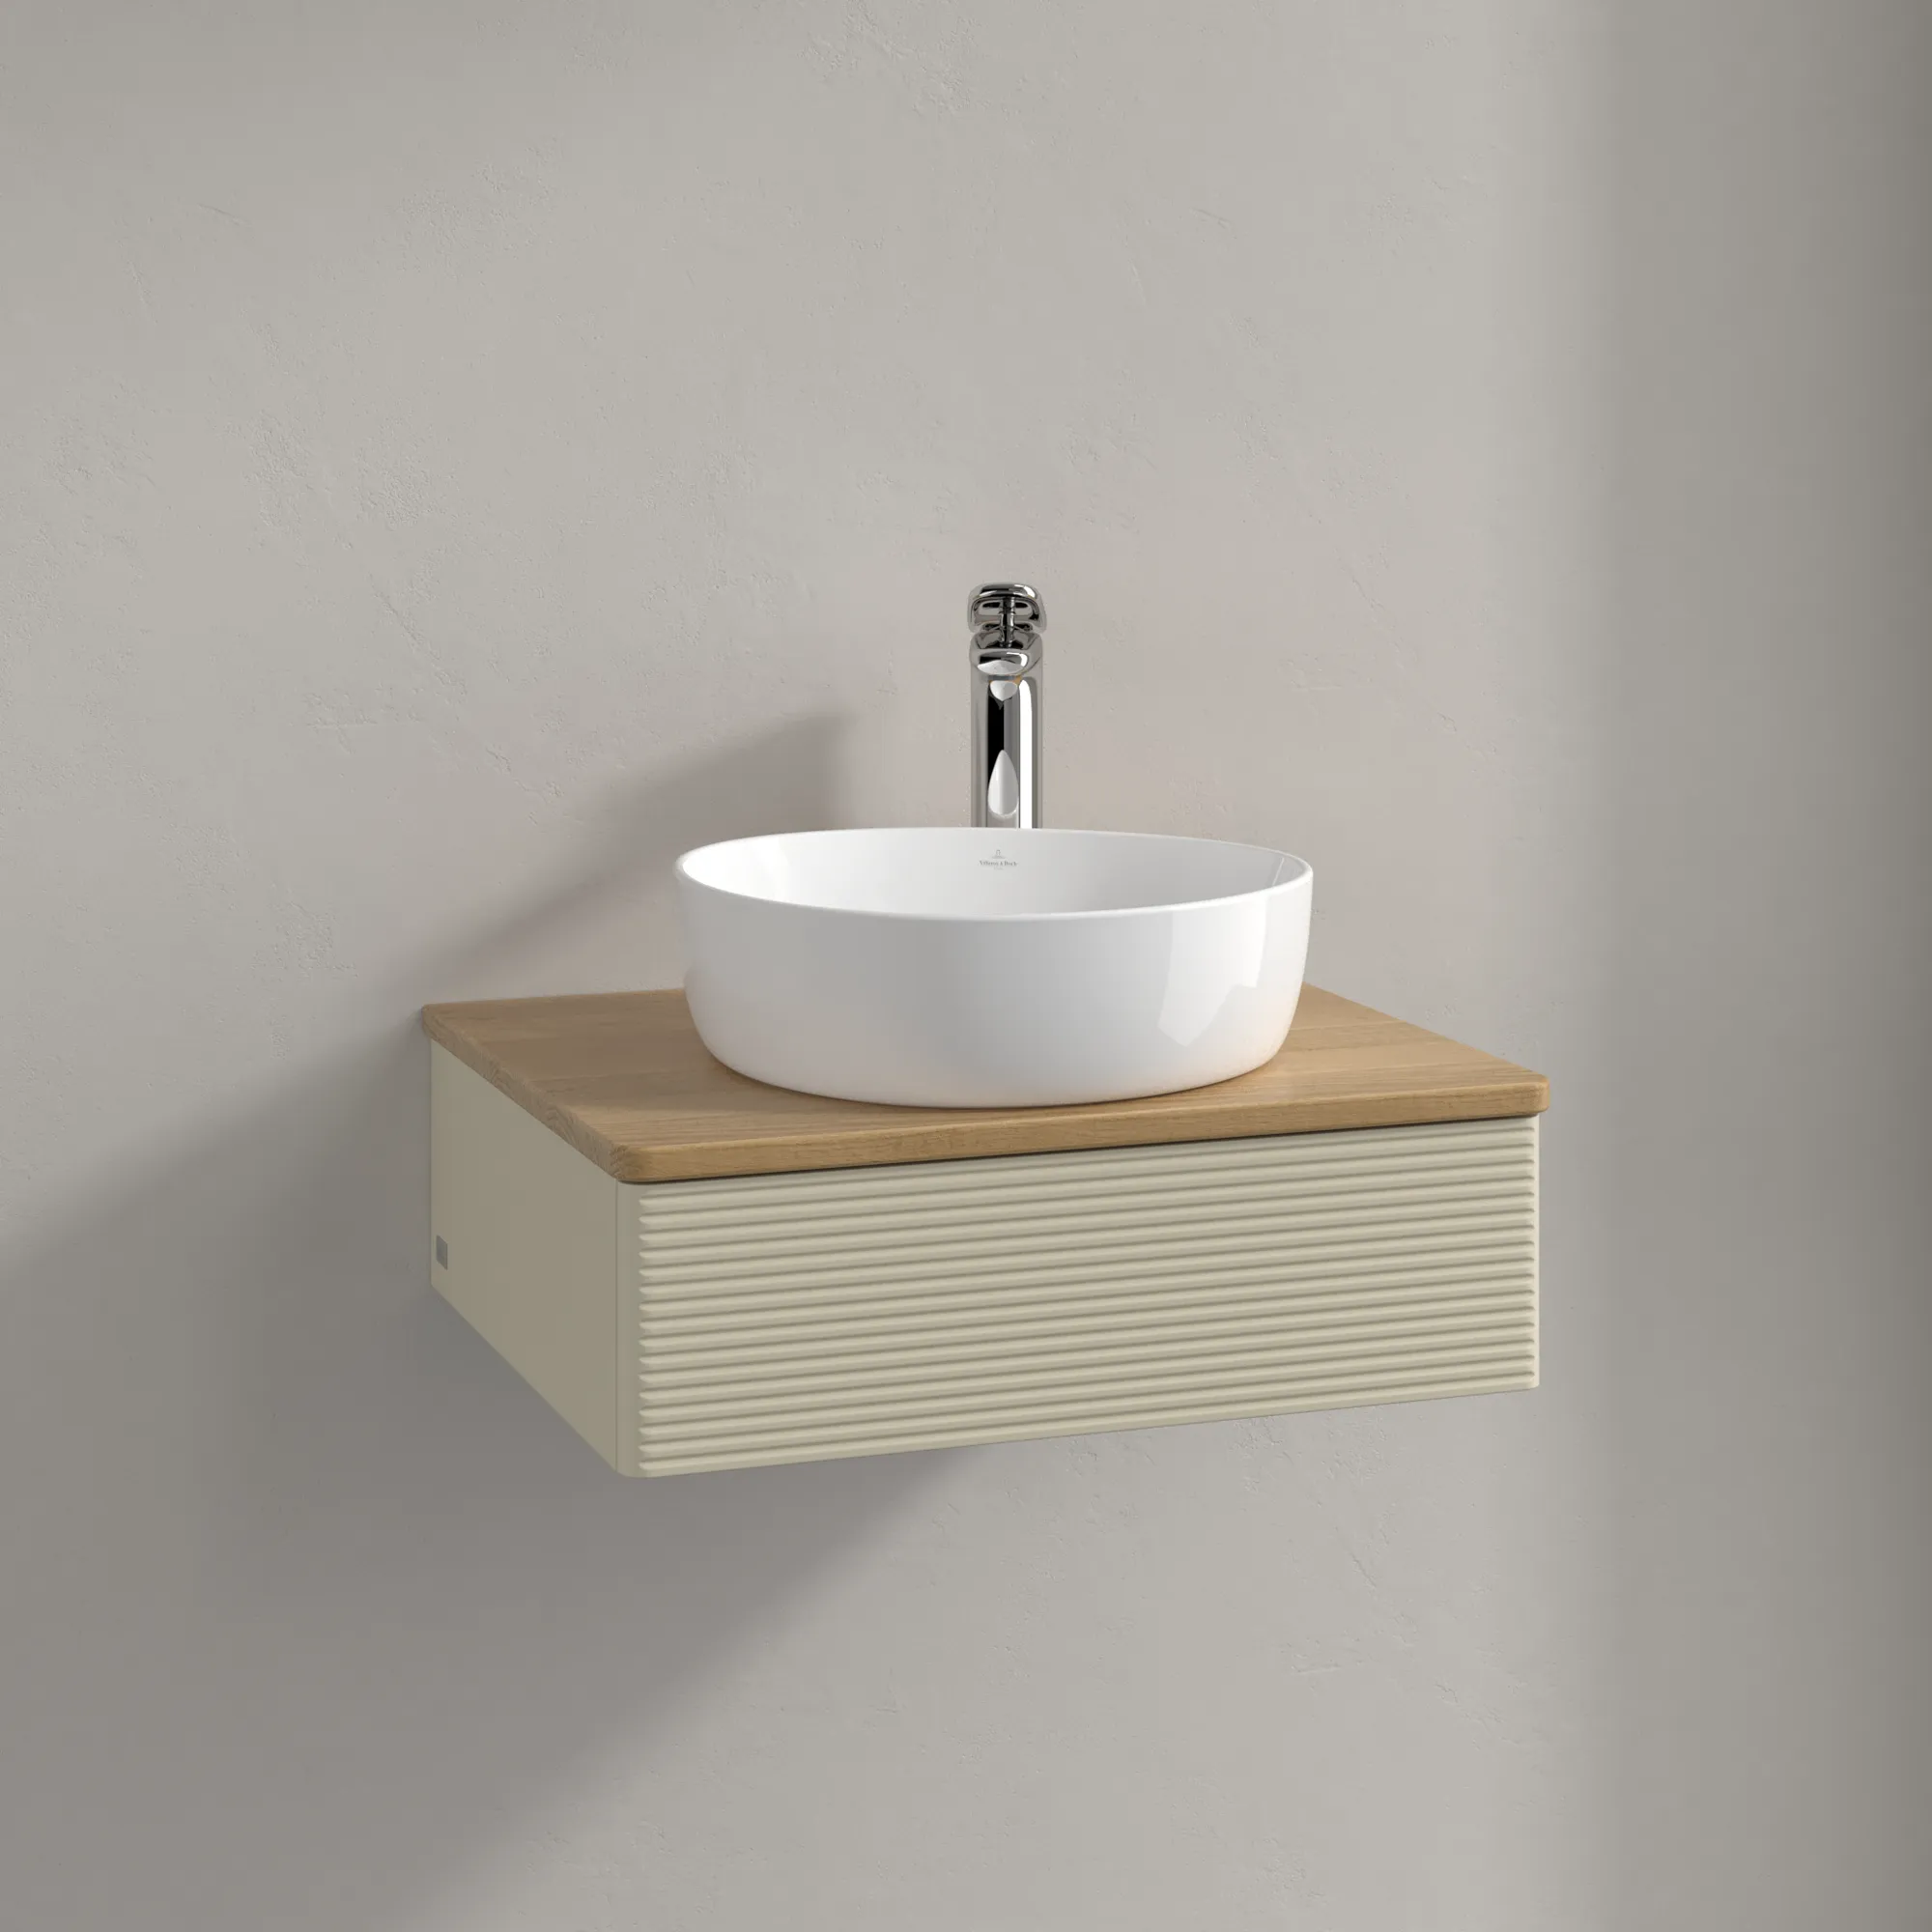 Picture of VILLEROY BOCH Antao Vanity unit, with lighting, 1 pull-out compartment, 600 x 190 x 500 mm, Front with grain texture, Silk Grey Matt Lacquer / Honey Oak #L07151HJ